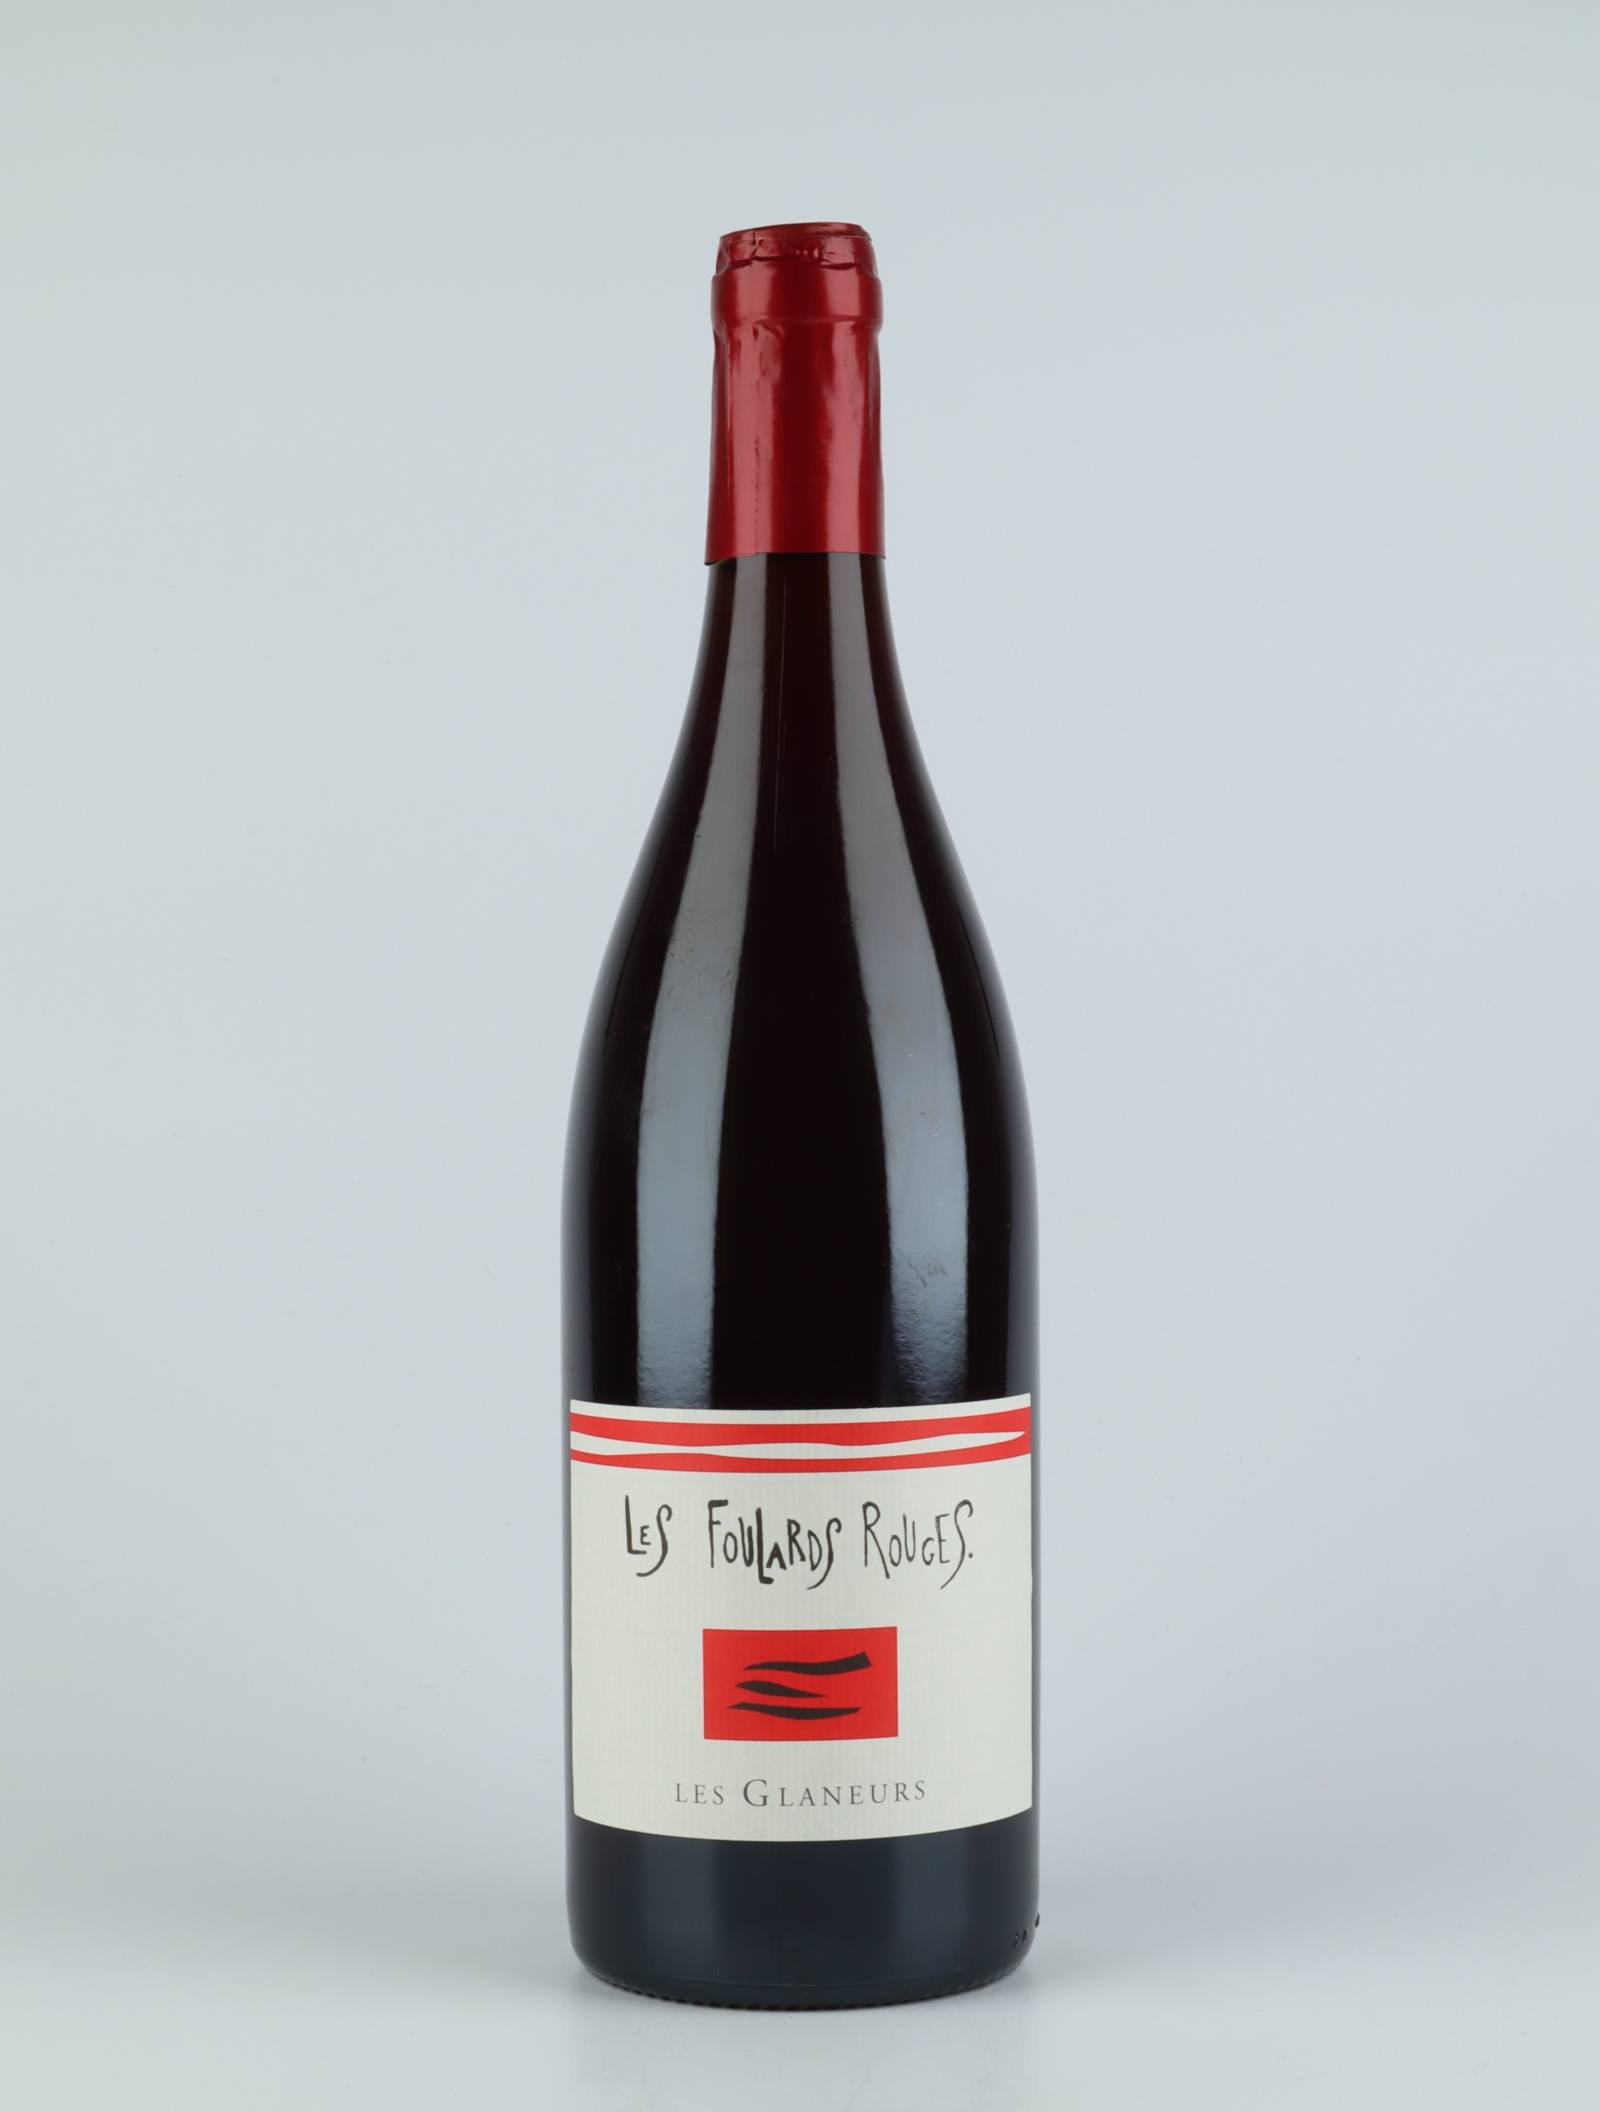 A bottle 2019 Glaneurs Red wine from Les Foulards Rouges, Languedoc in France